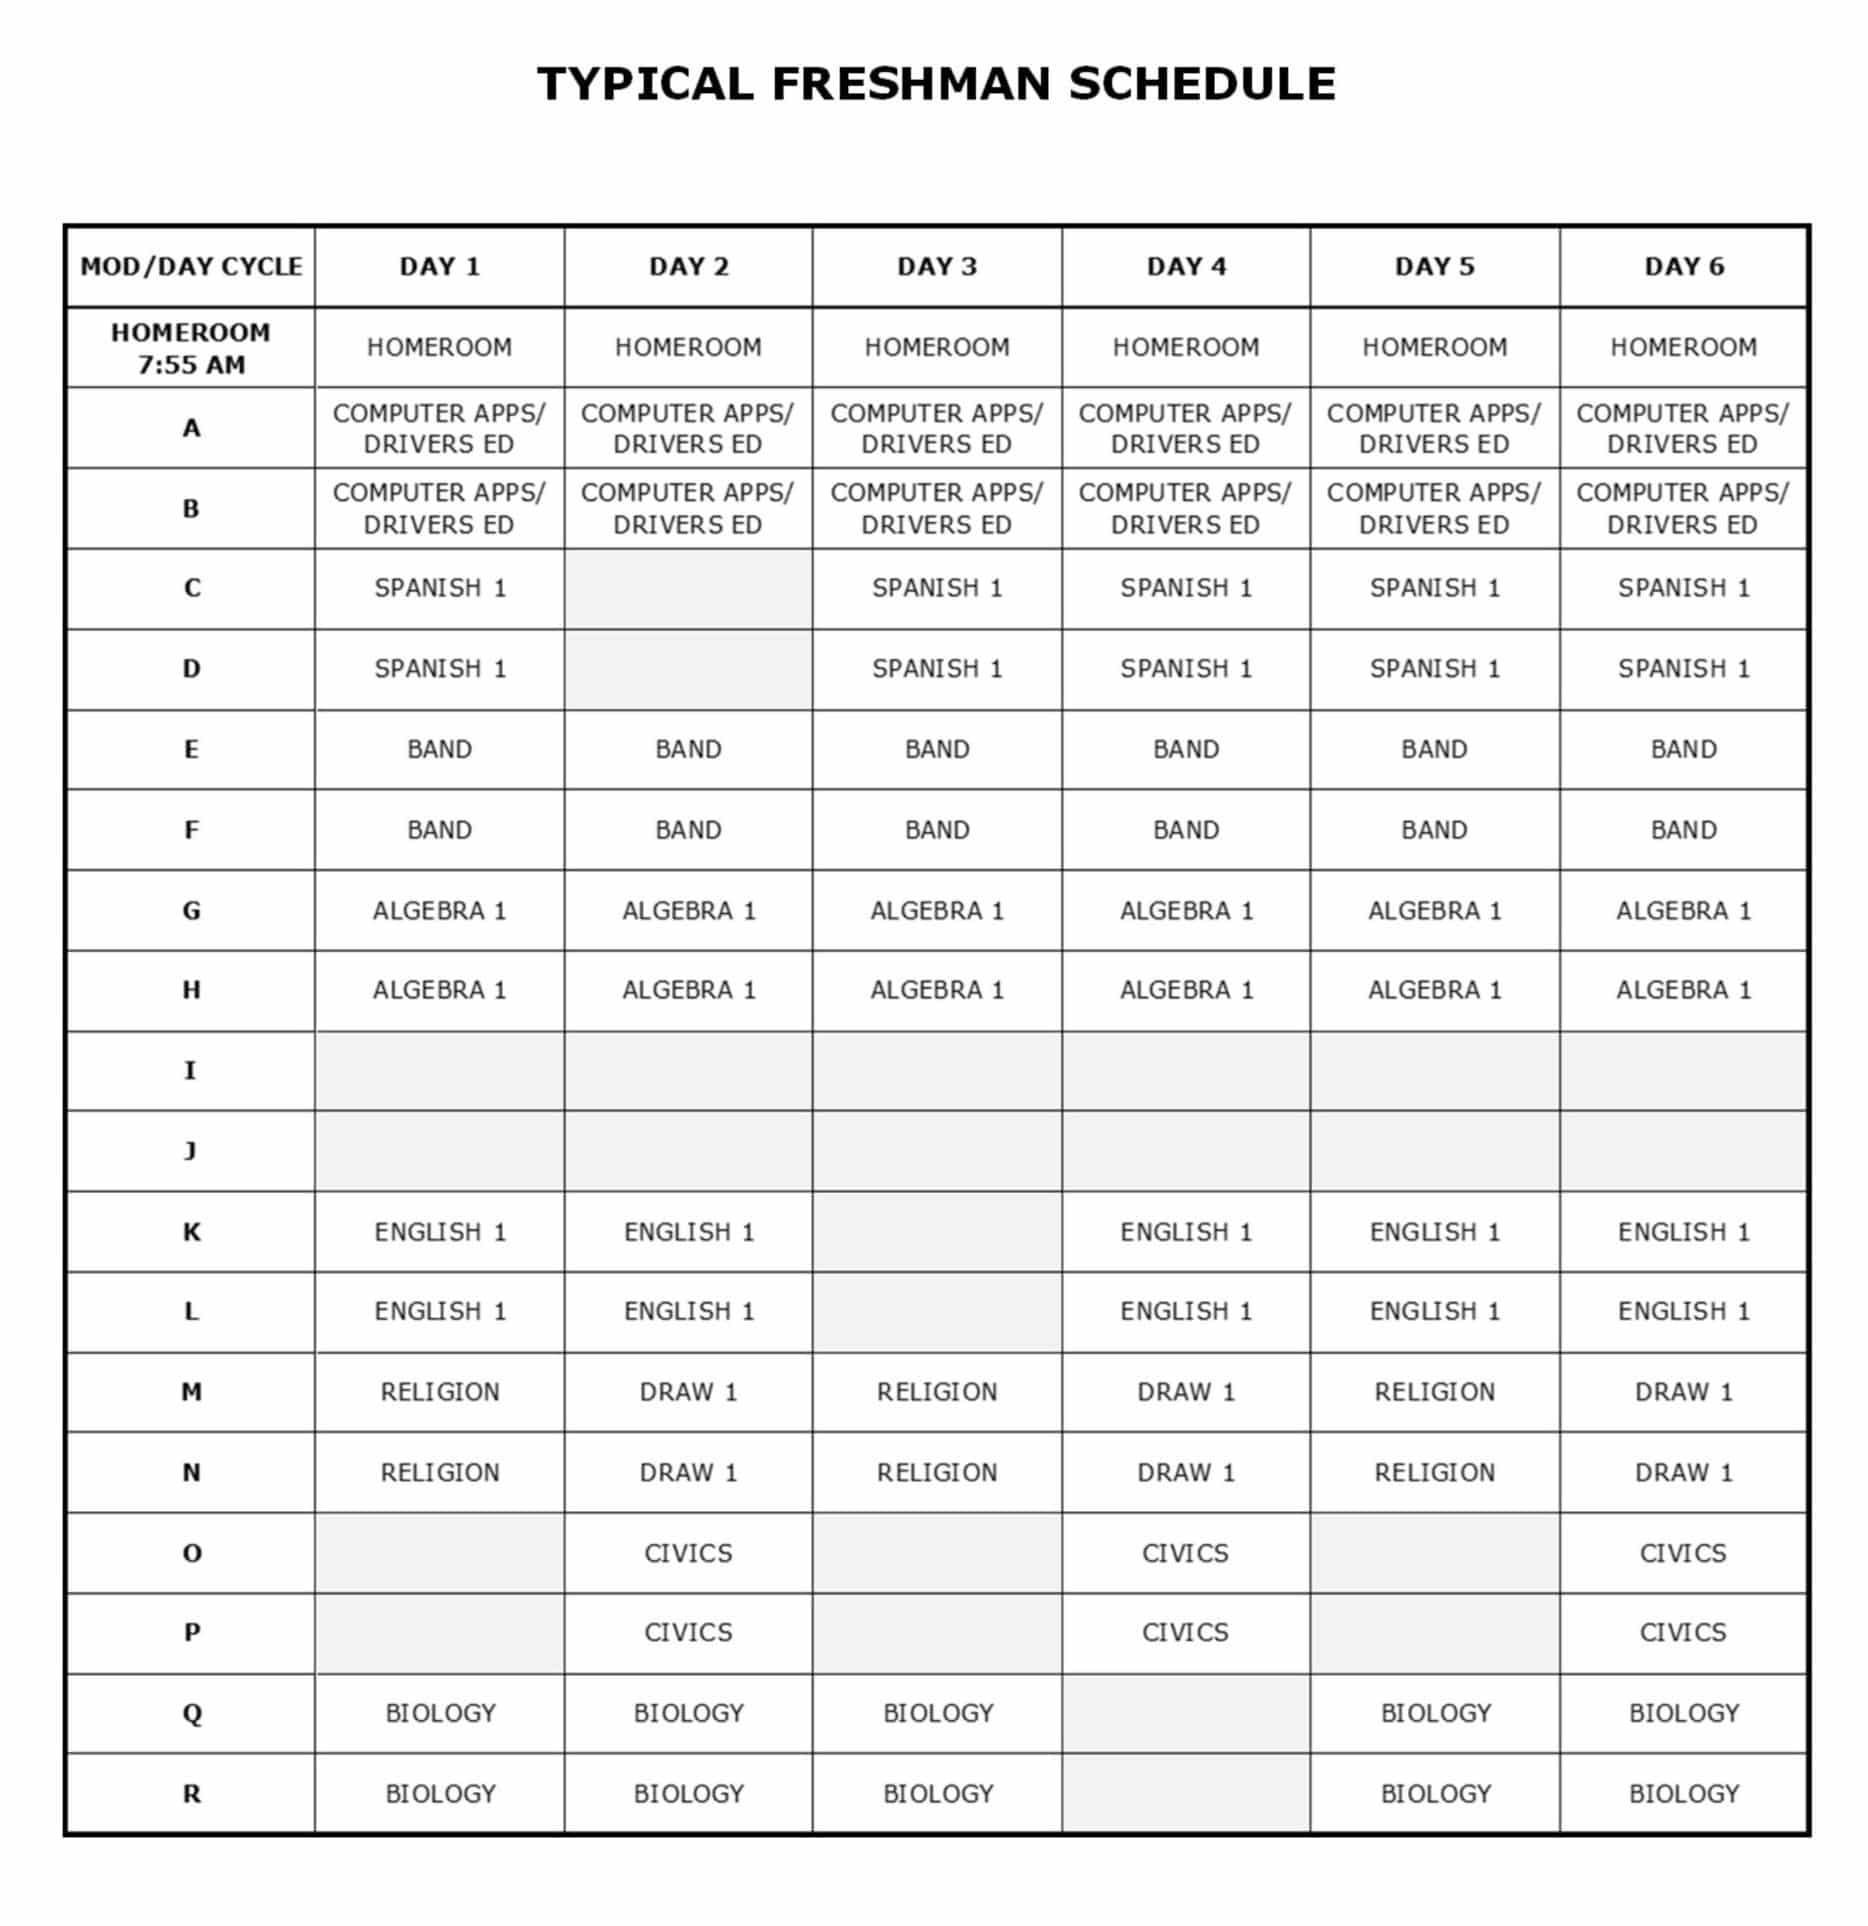 Table of Typical Freshman Schedule